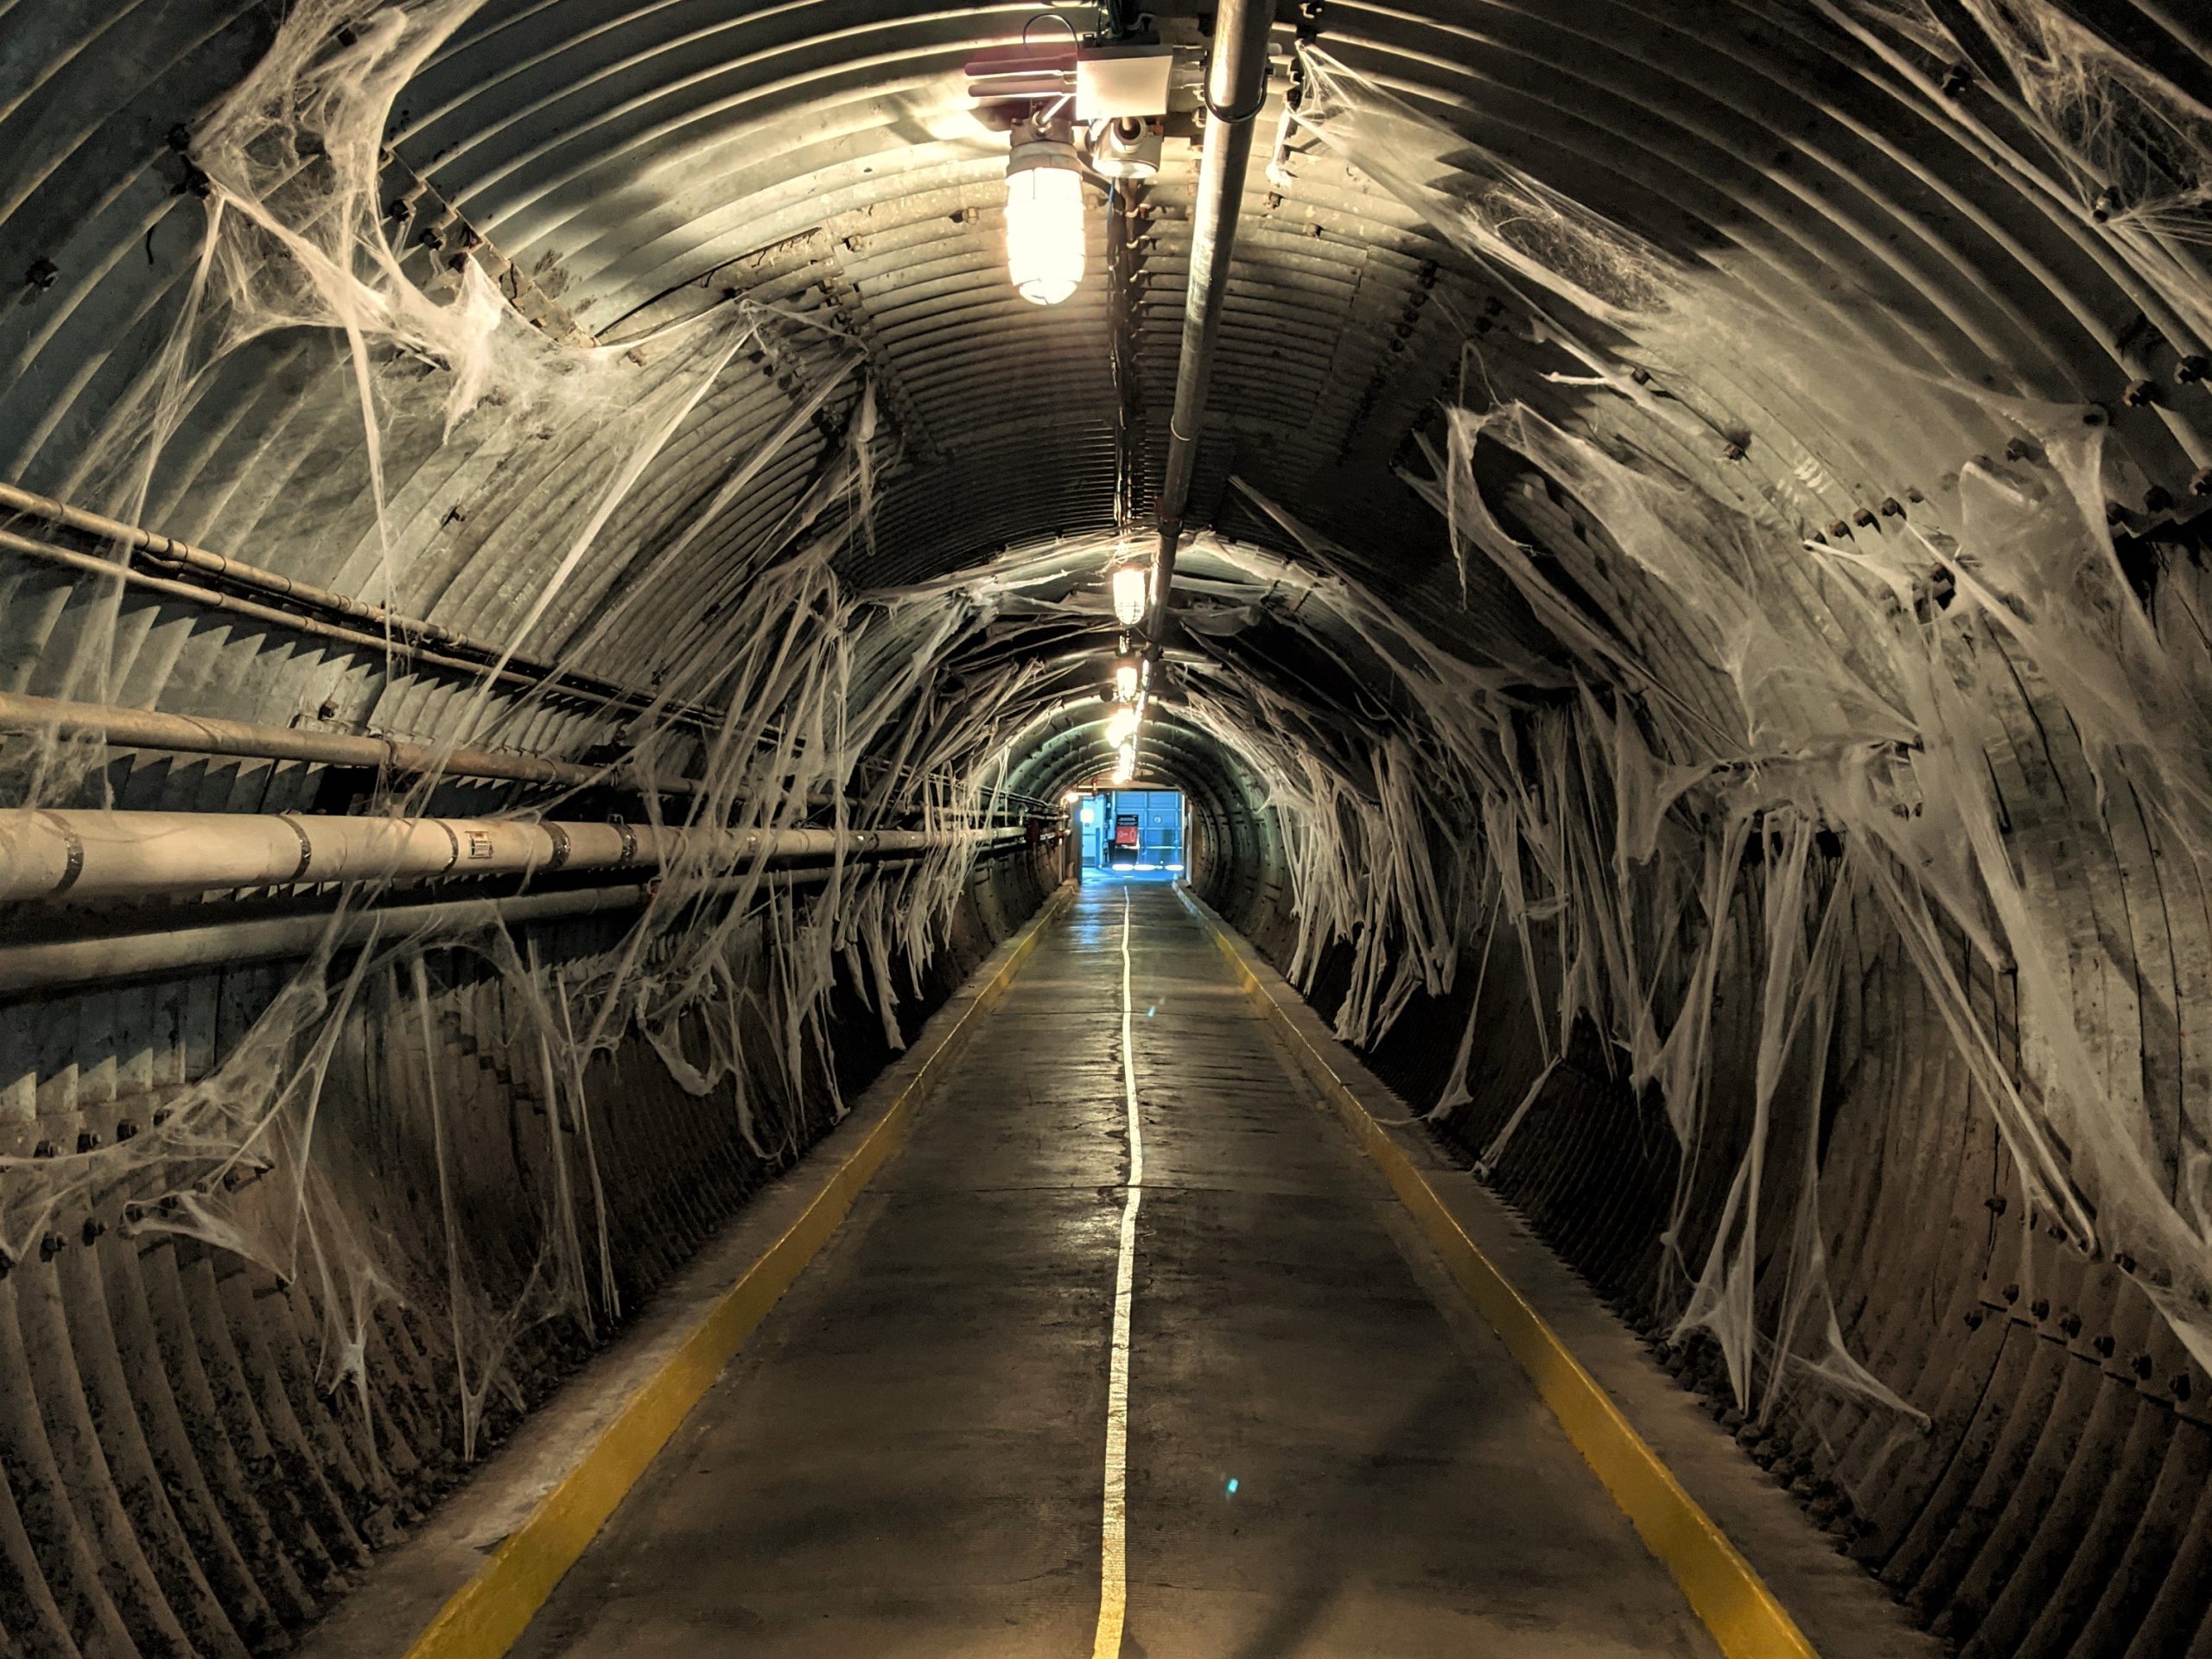 The Diefenbunker's Blast Tunnel descending into the background with spiderwebs covering the tunnel walls.